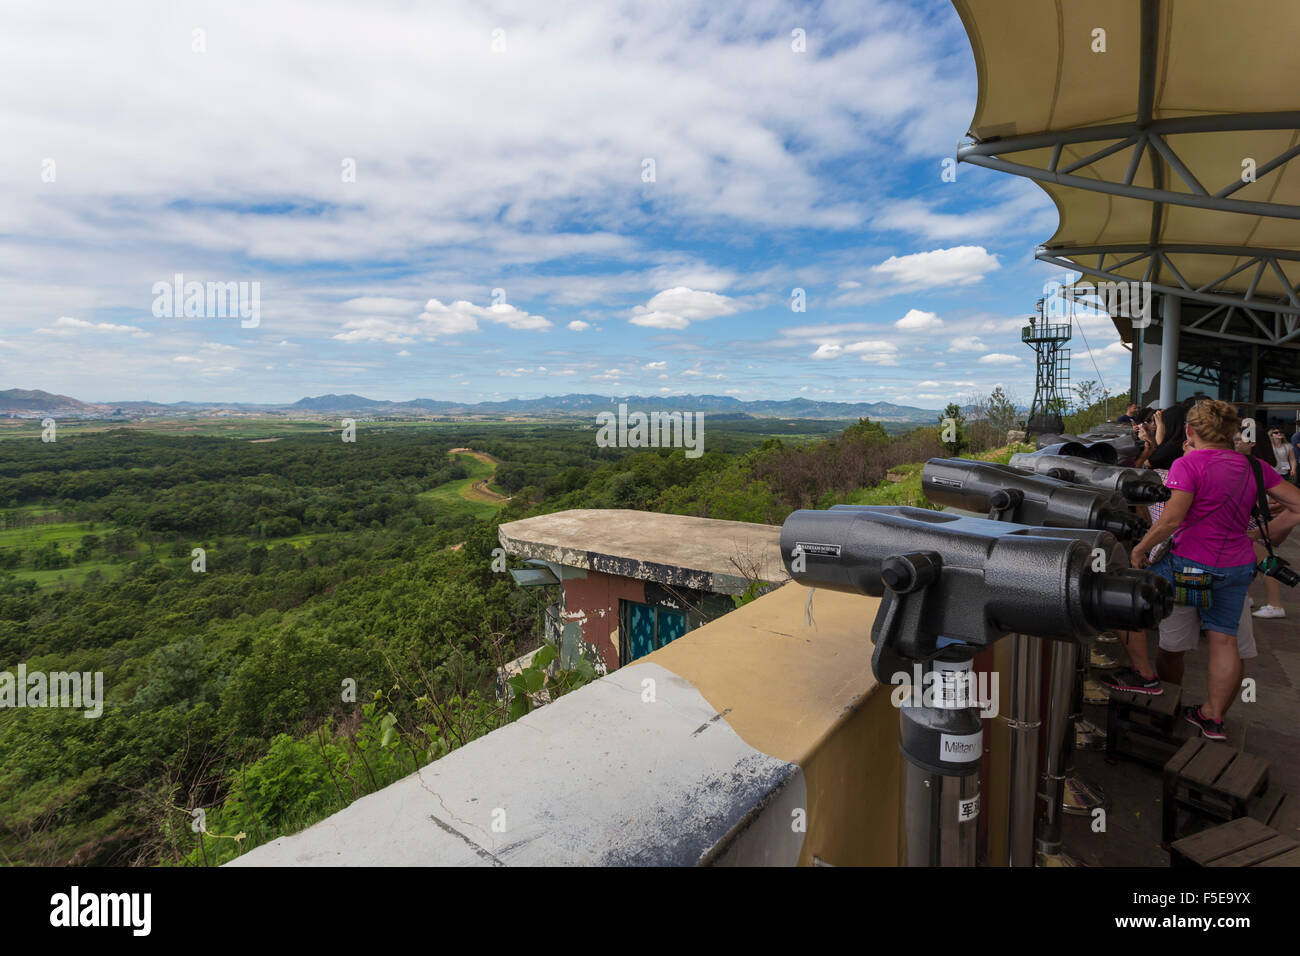 Tourists look at North Korea from the Dora Observatory, Demilitarised Zone (DMZ), North and South Korea border, Asia Stock Photo